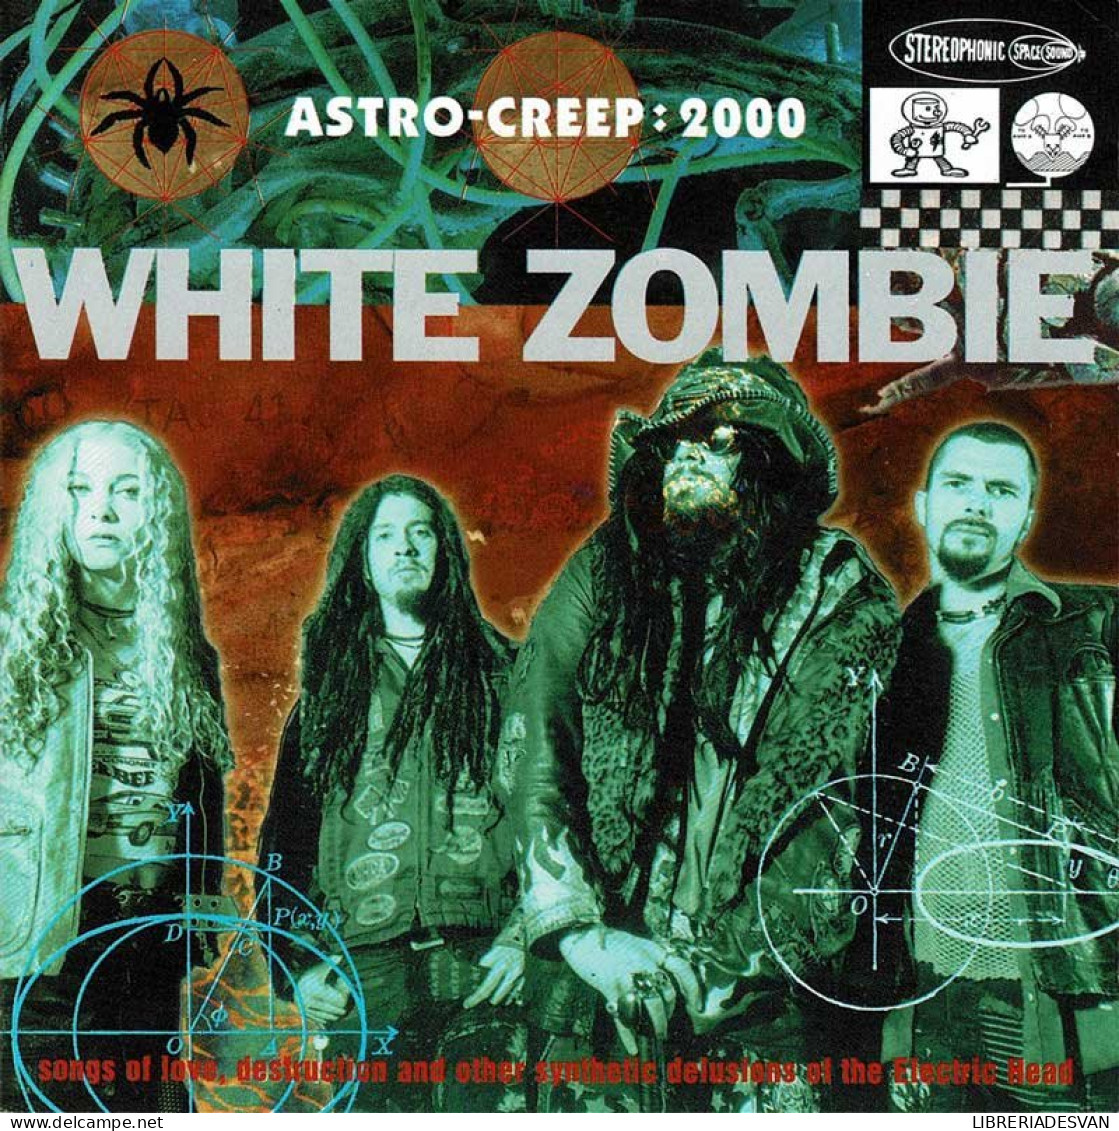 White Zombie - Astro-Creep: 2000 (Songs Of Love, Destruction And Other Synthetic Delusions Of The Electric Head). CD - Rock